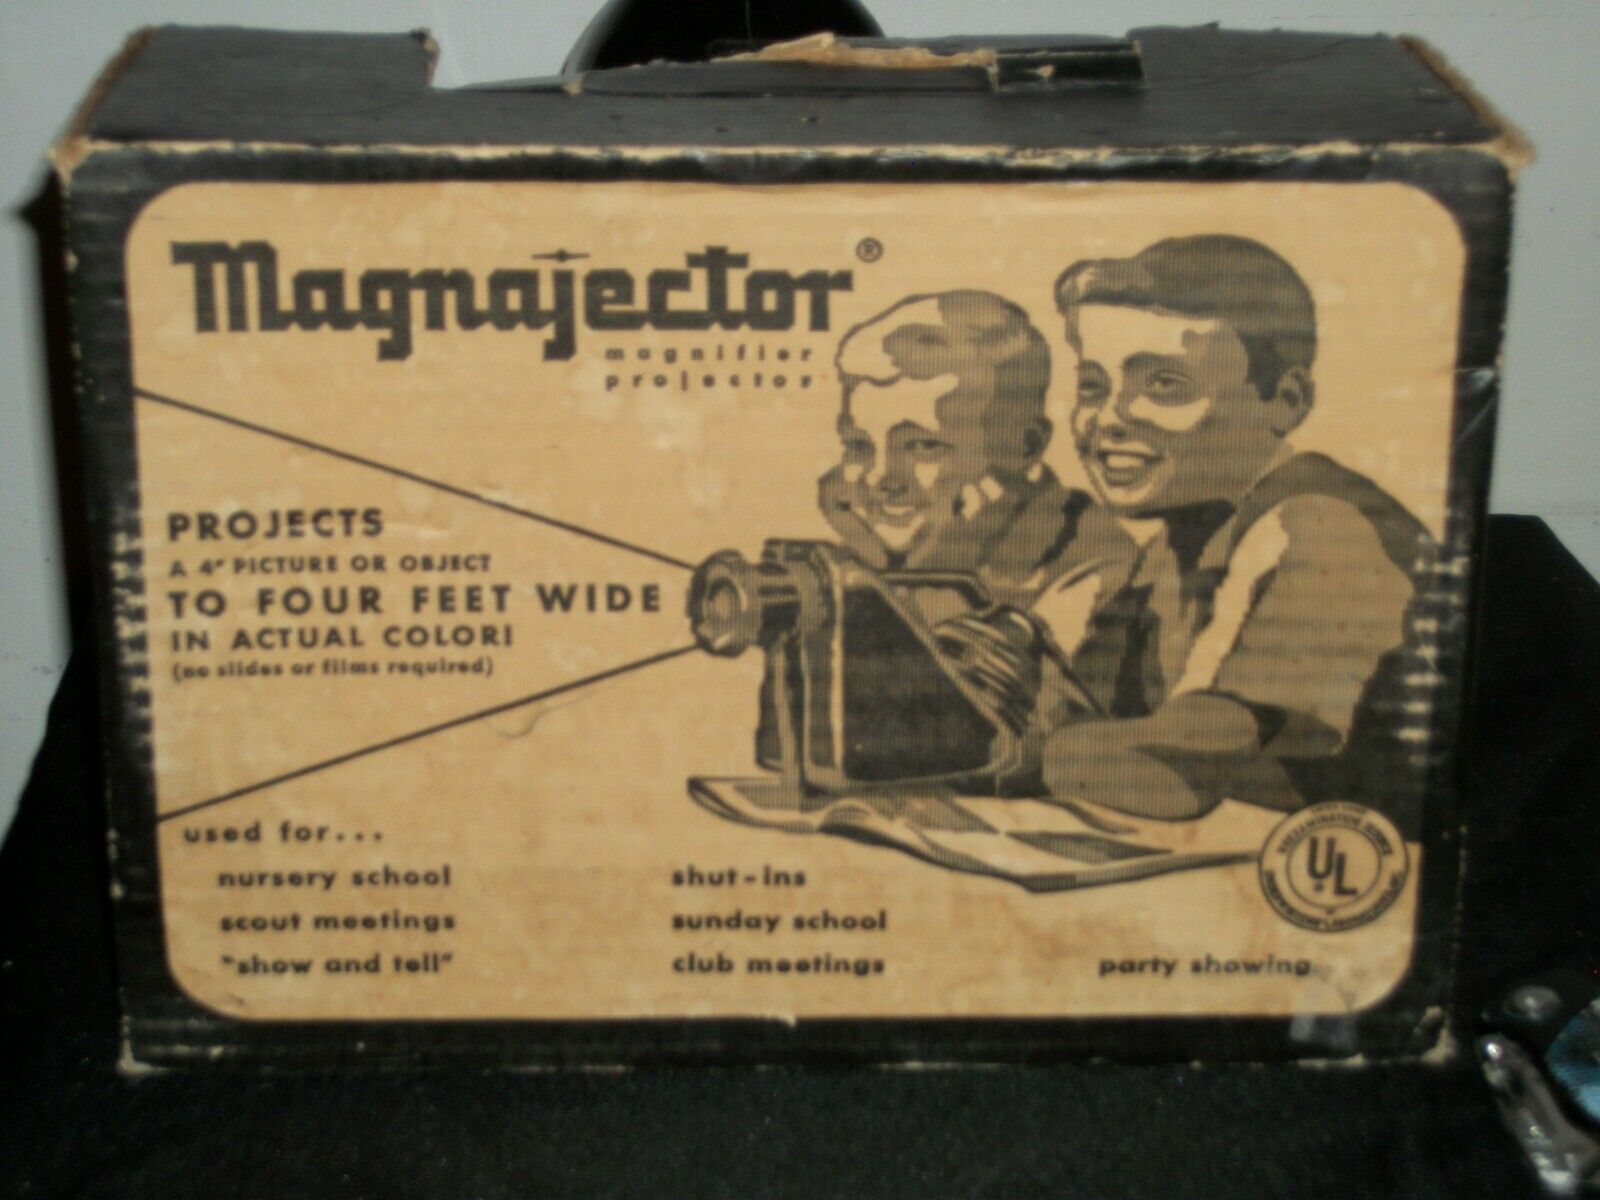 Magnajector Magnifier Projector 1962 Rainbow Crafts The Play Doh People With Box